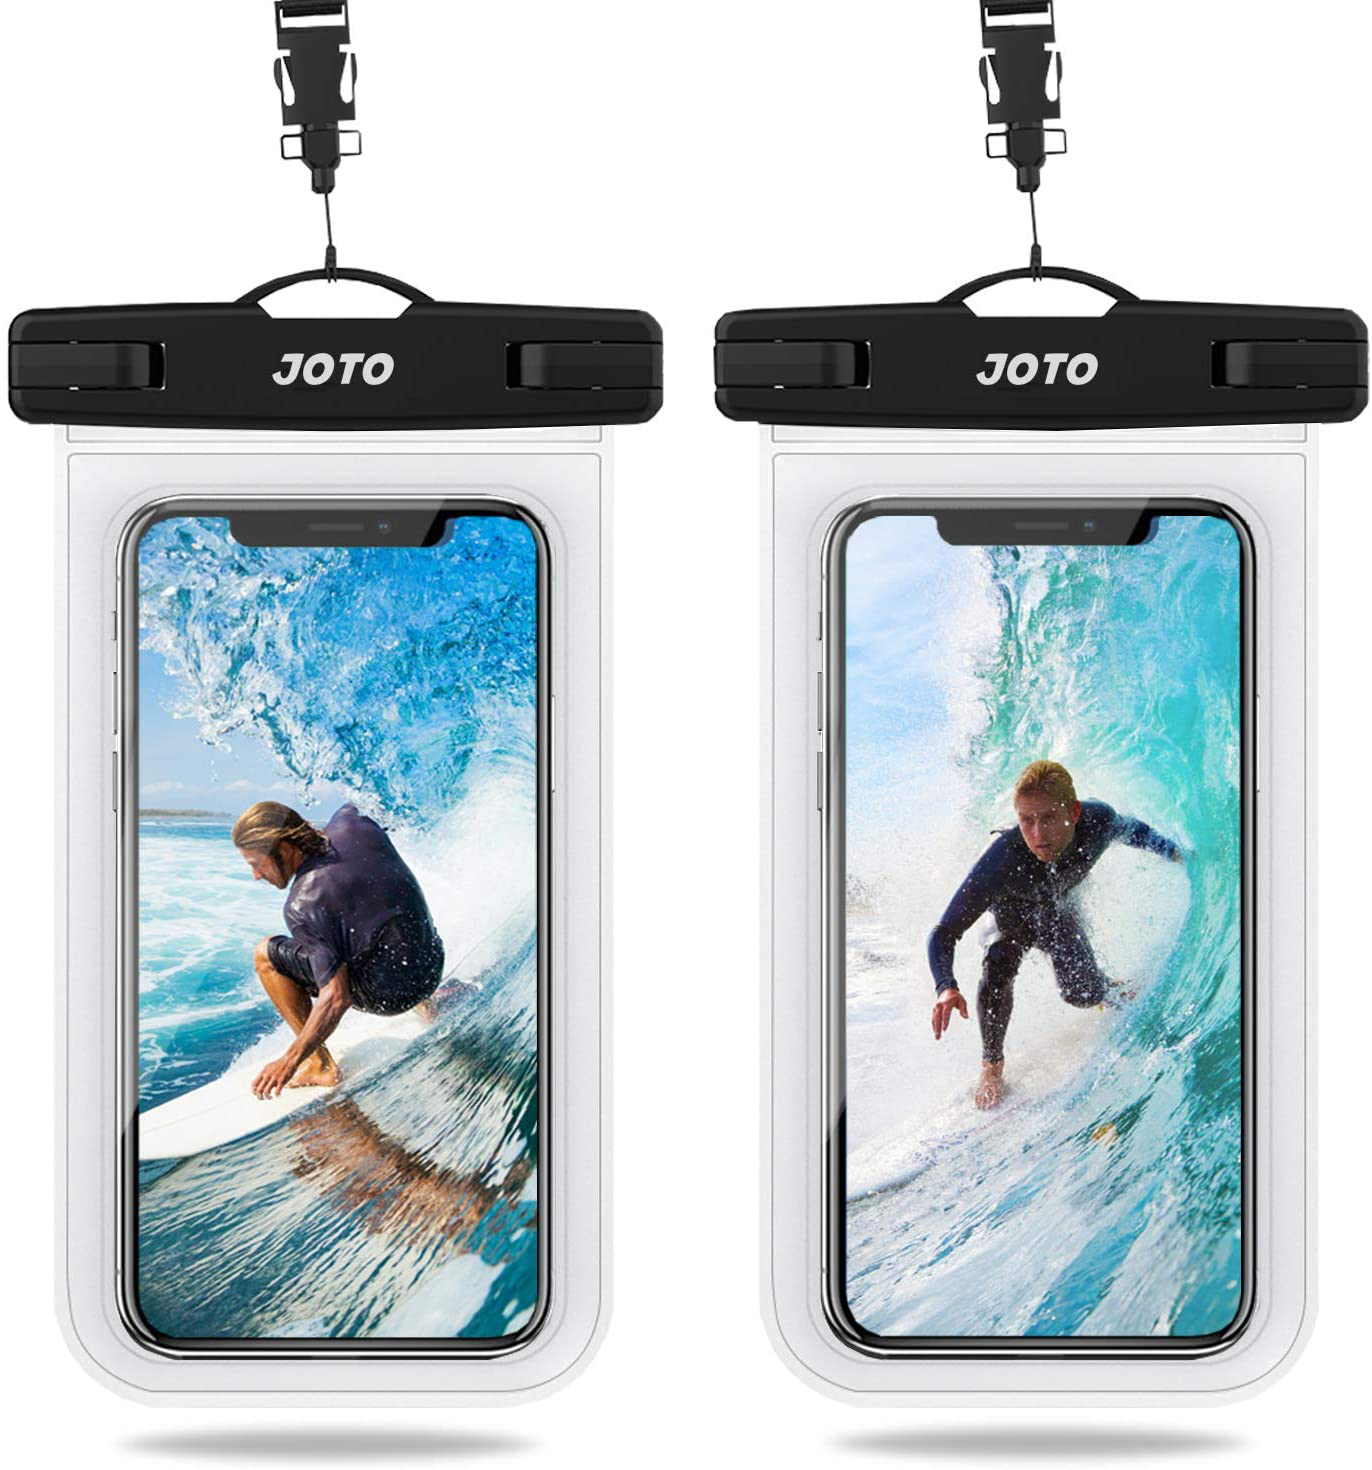 JOTO Universal Waterproof Pouch, IPX8 Waterproof Cellphone Dry Bag Underwater Case for iPhone 12 Pro Max 11 Pro Max Xs Max XR X 8 7 6S, Galaxy S20 Ultra S10 Note10 9 up to 7" -2 Pack